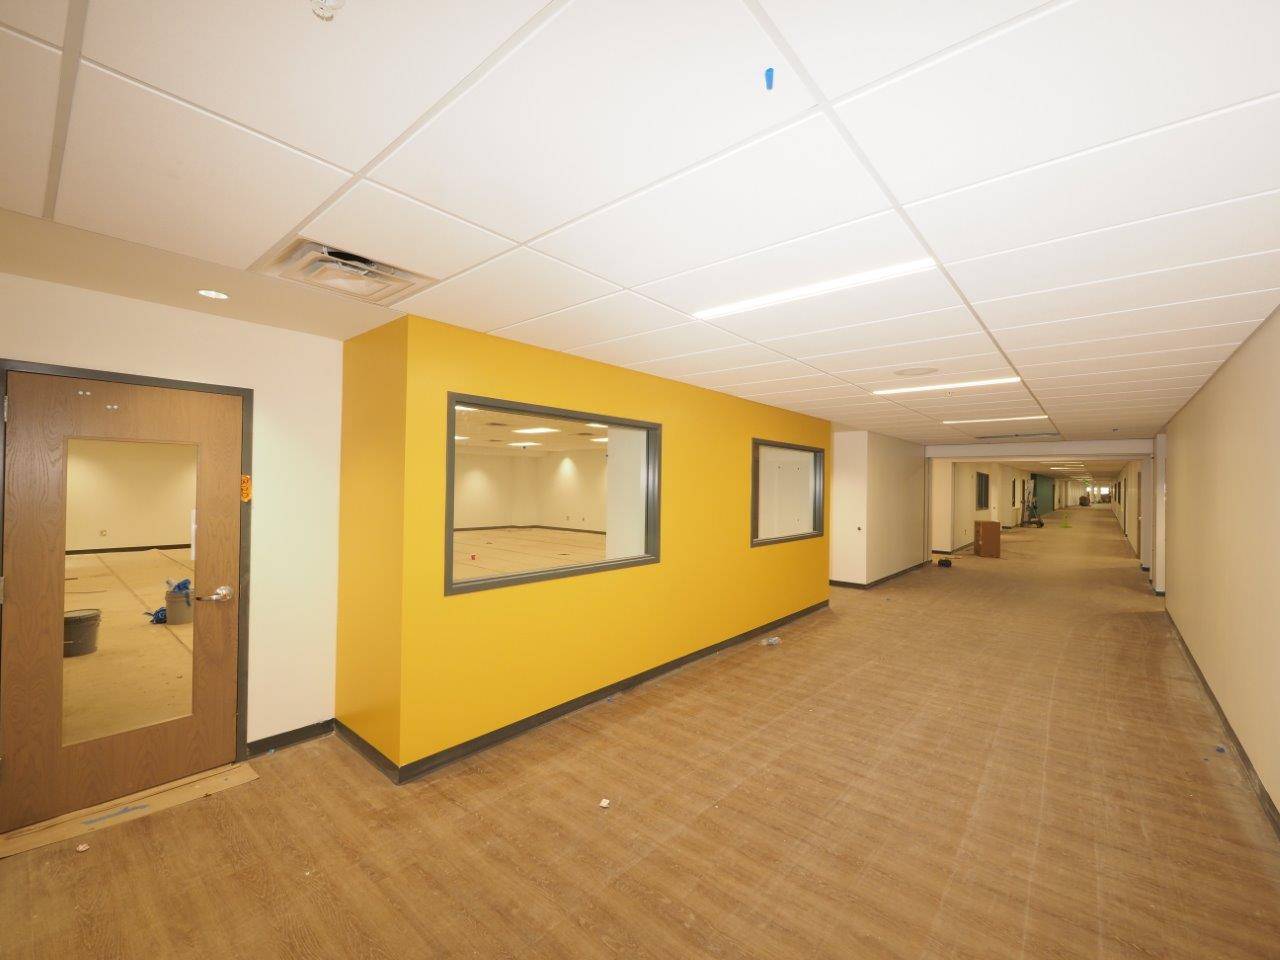 Inside the academic wing